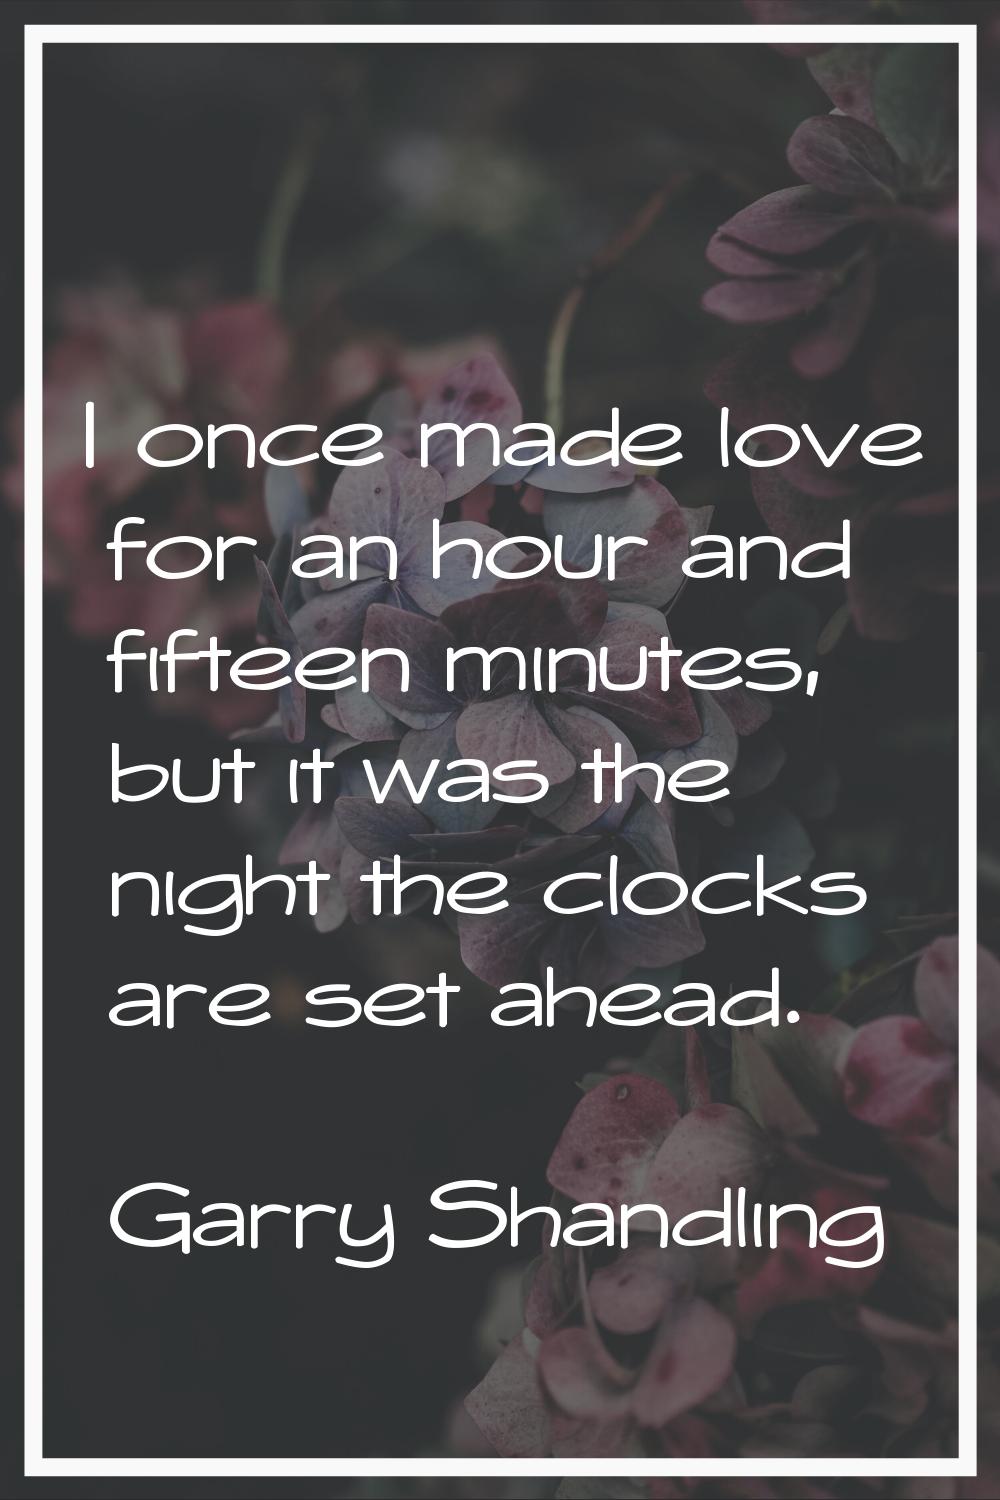 I once made love for an hour and fifteen minutes, but it was the night the clocks are set ahead.